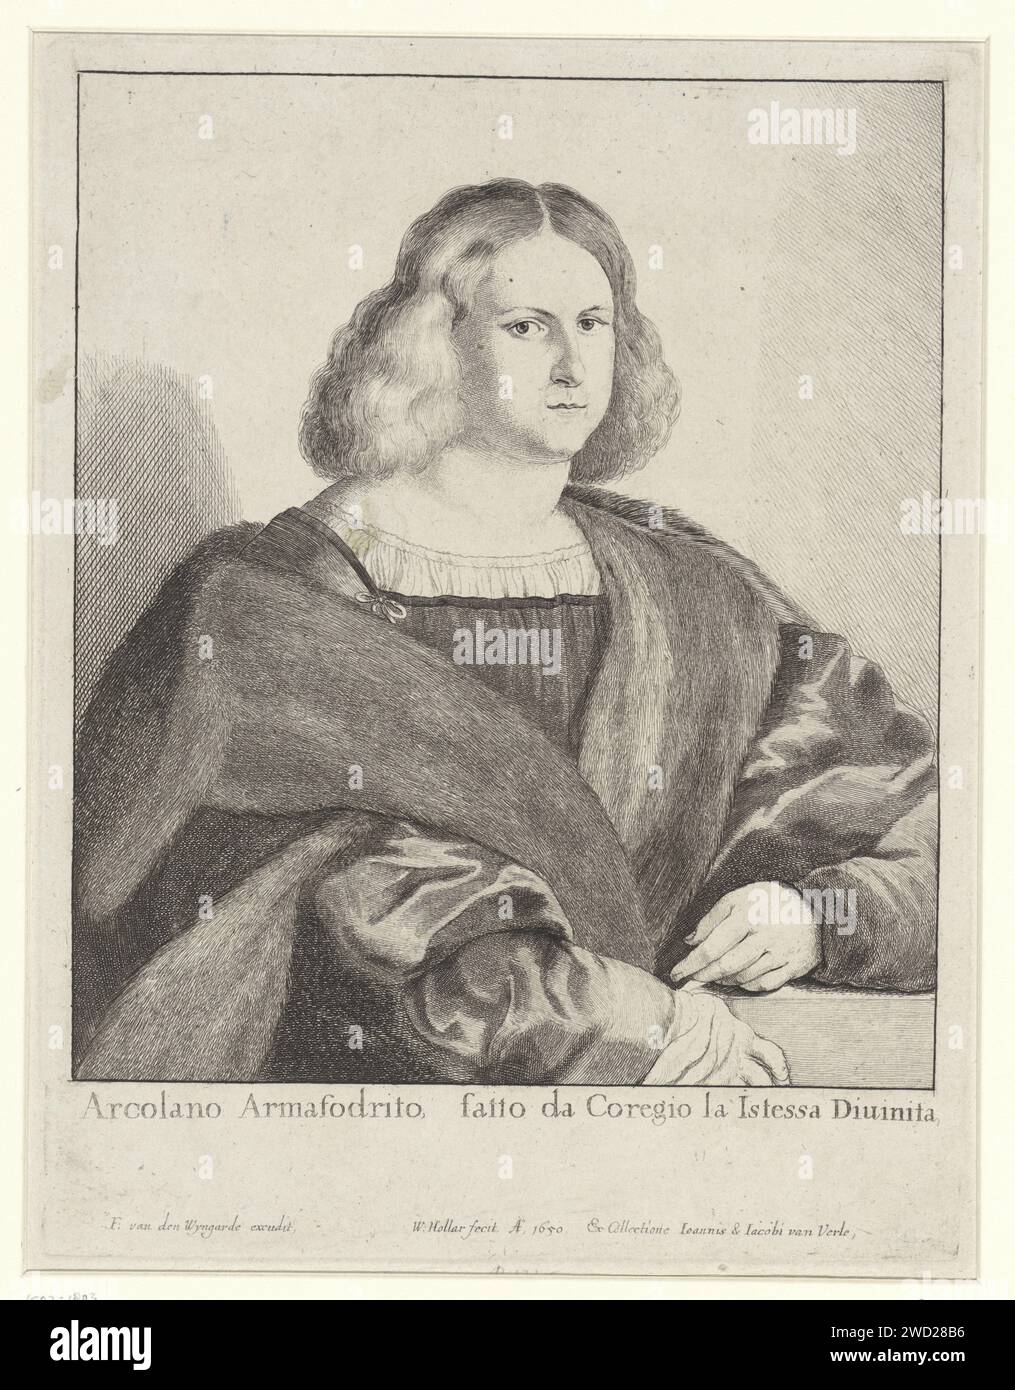 Portrait of a man with medium length hair, Wenceslaus Hollar, after Jacopo Palma (Il Vecchio), After Correggio, 1649 - 1651 print  Antwerp paper etching anonymous historical person portrayed alone Stock Photo